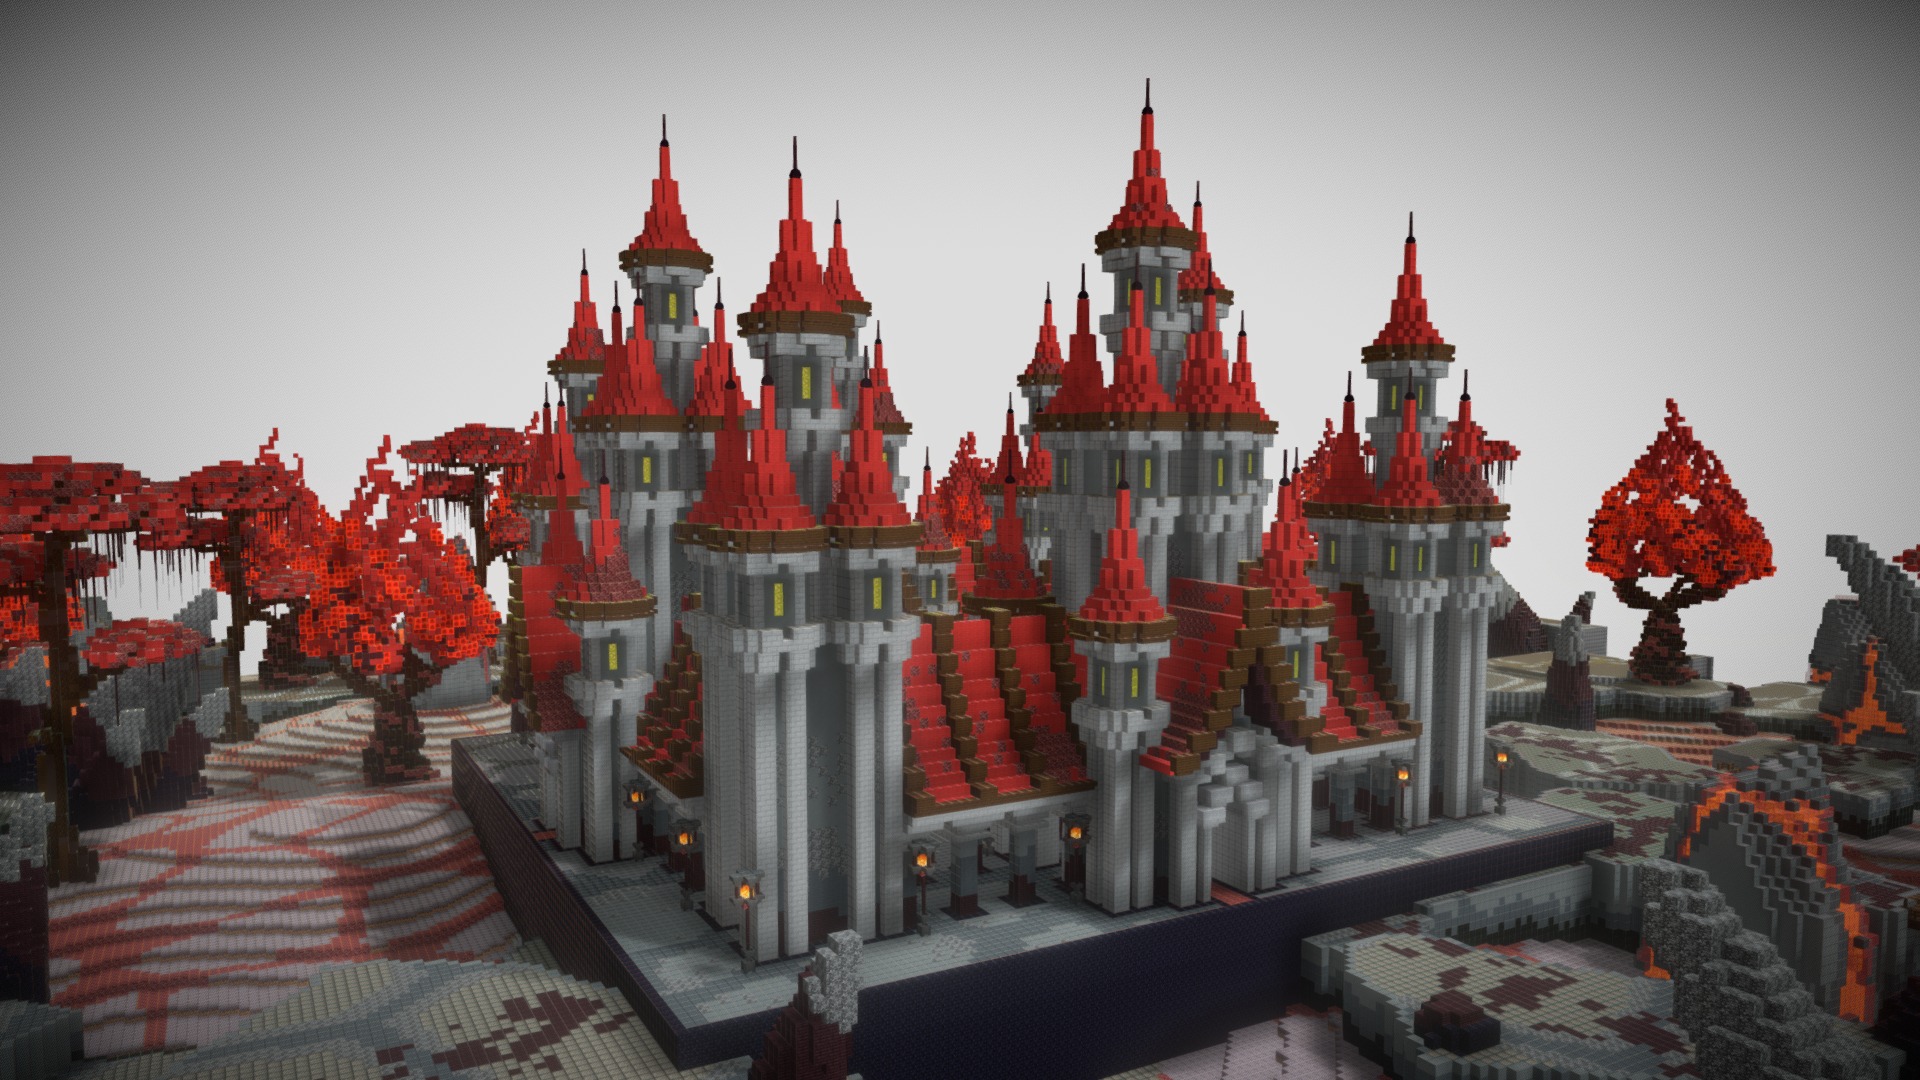 3D model Inferno Spawn + 512×512 Warzone - This is a 3D model of the Inferno Spawn + 512x512 Warzone. The 3D model is about a large white castle with red roofs.